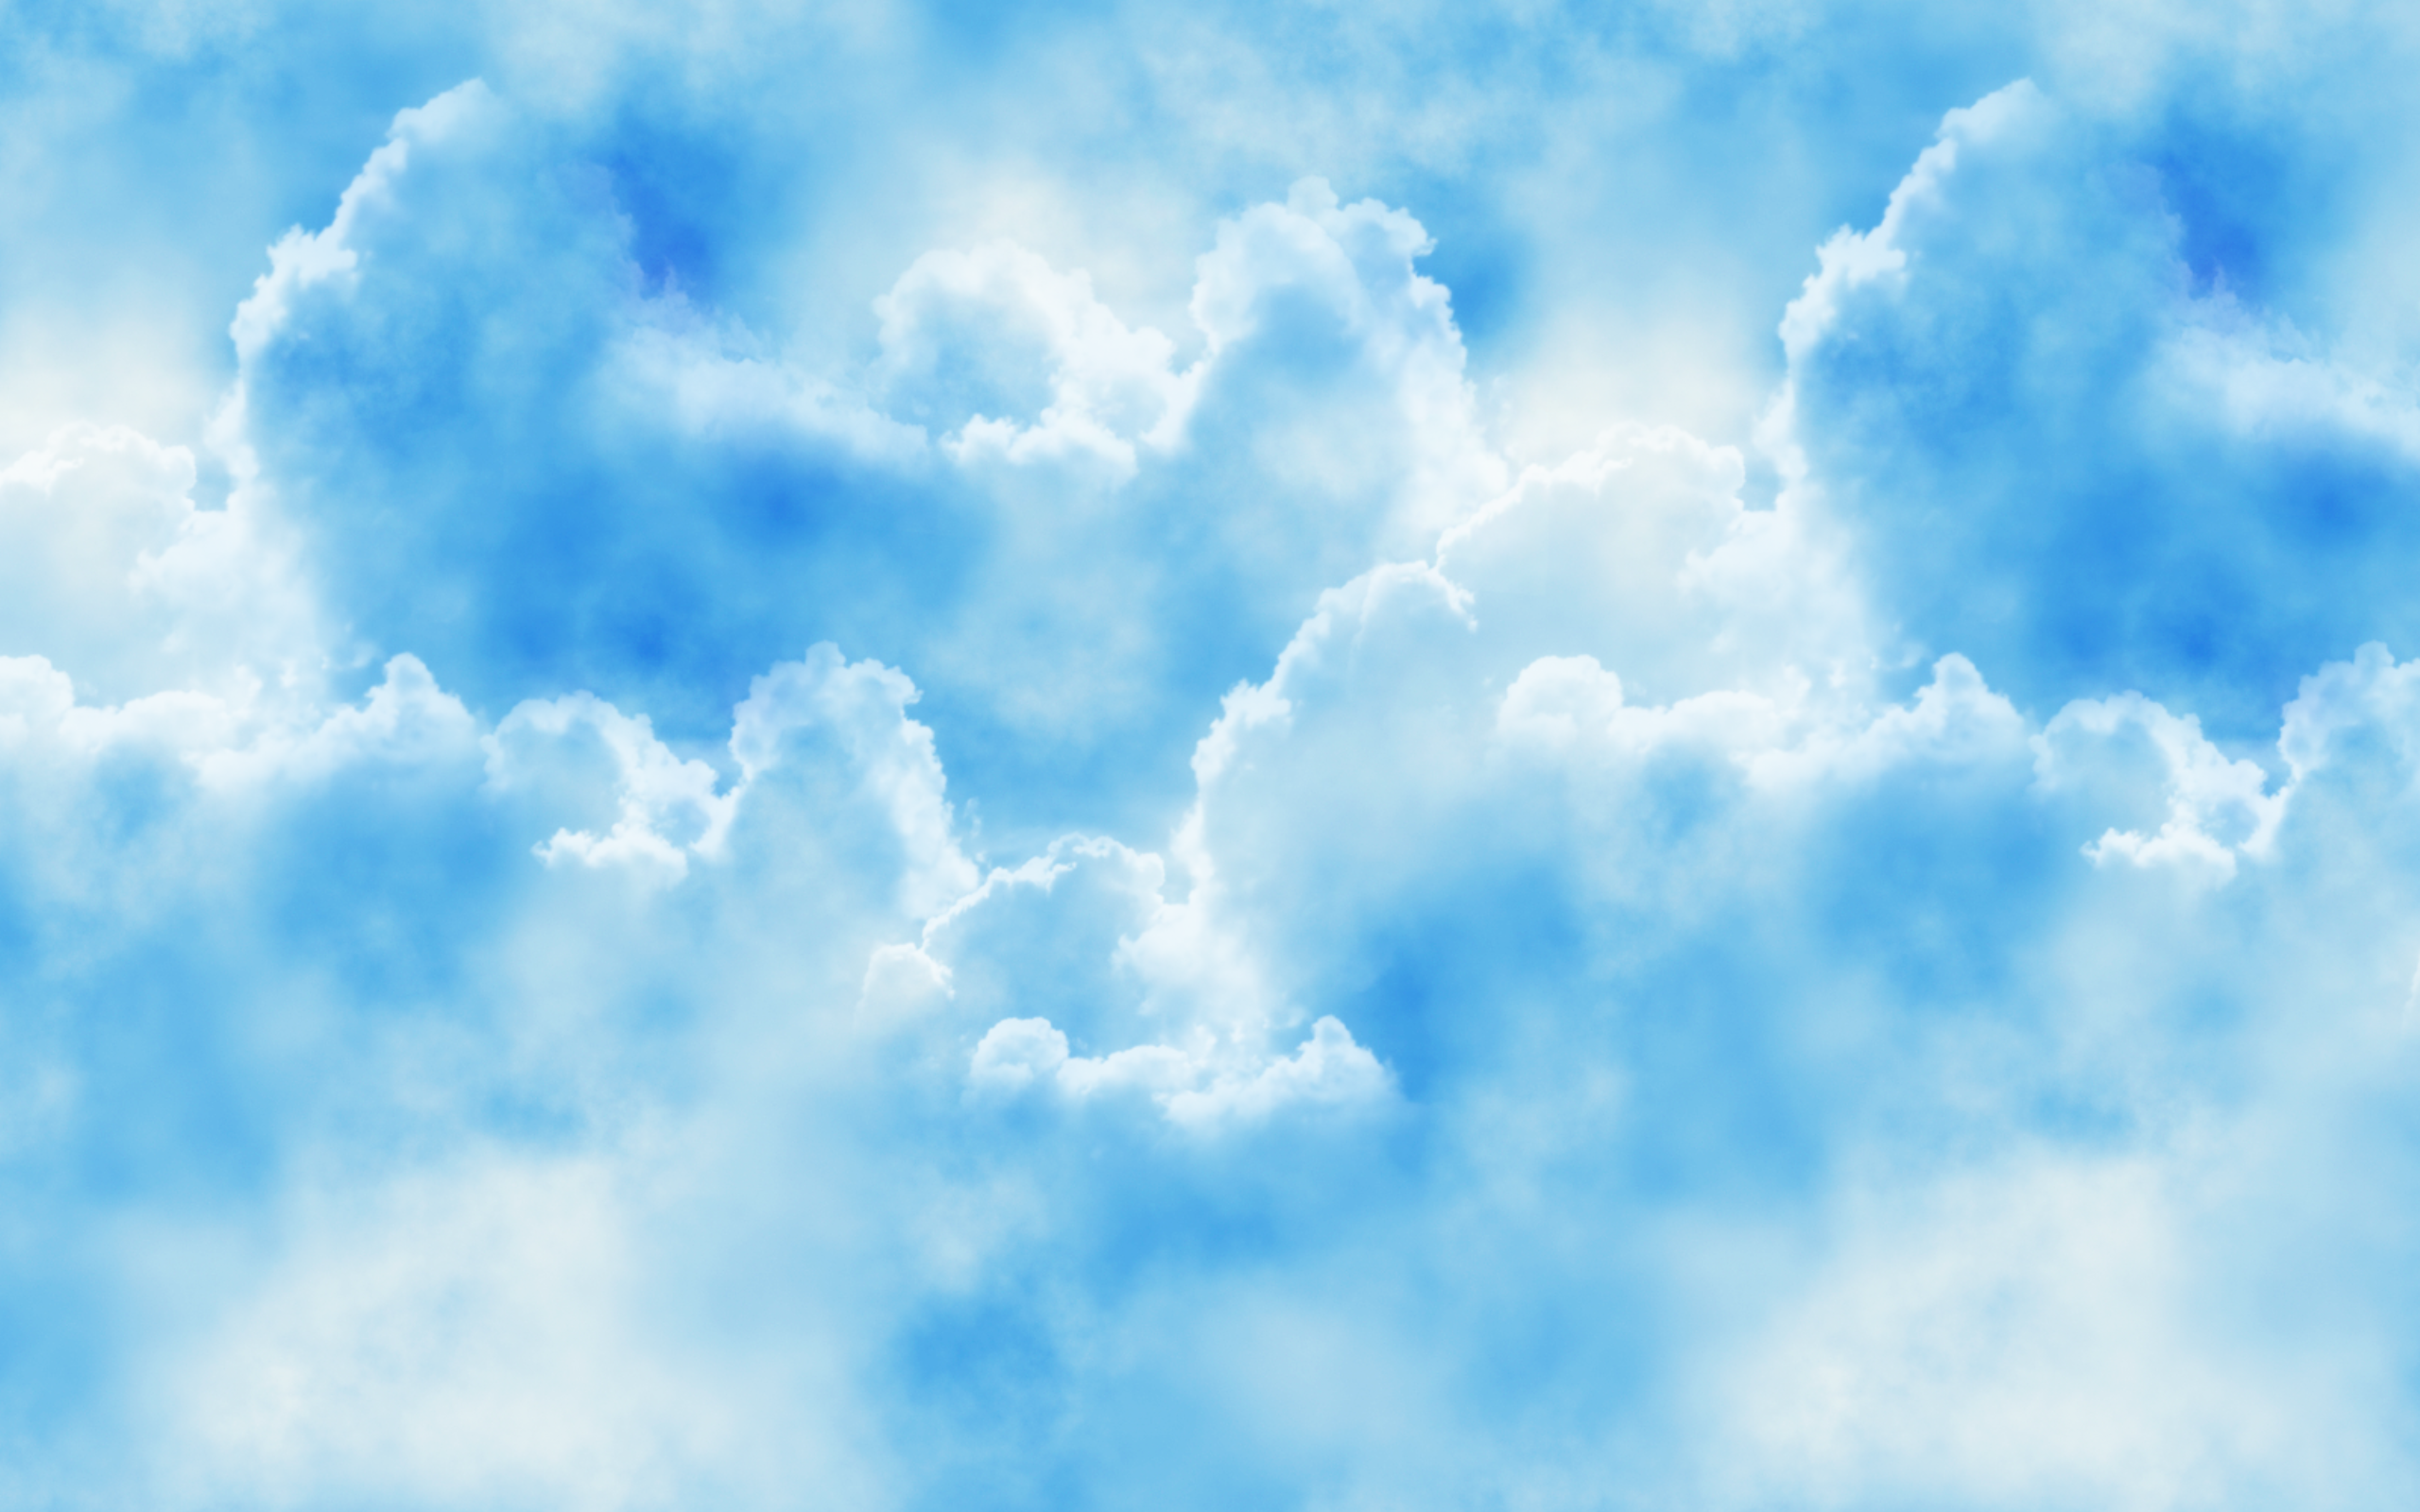 chicken nuggets sky backgrounds